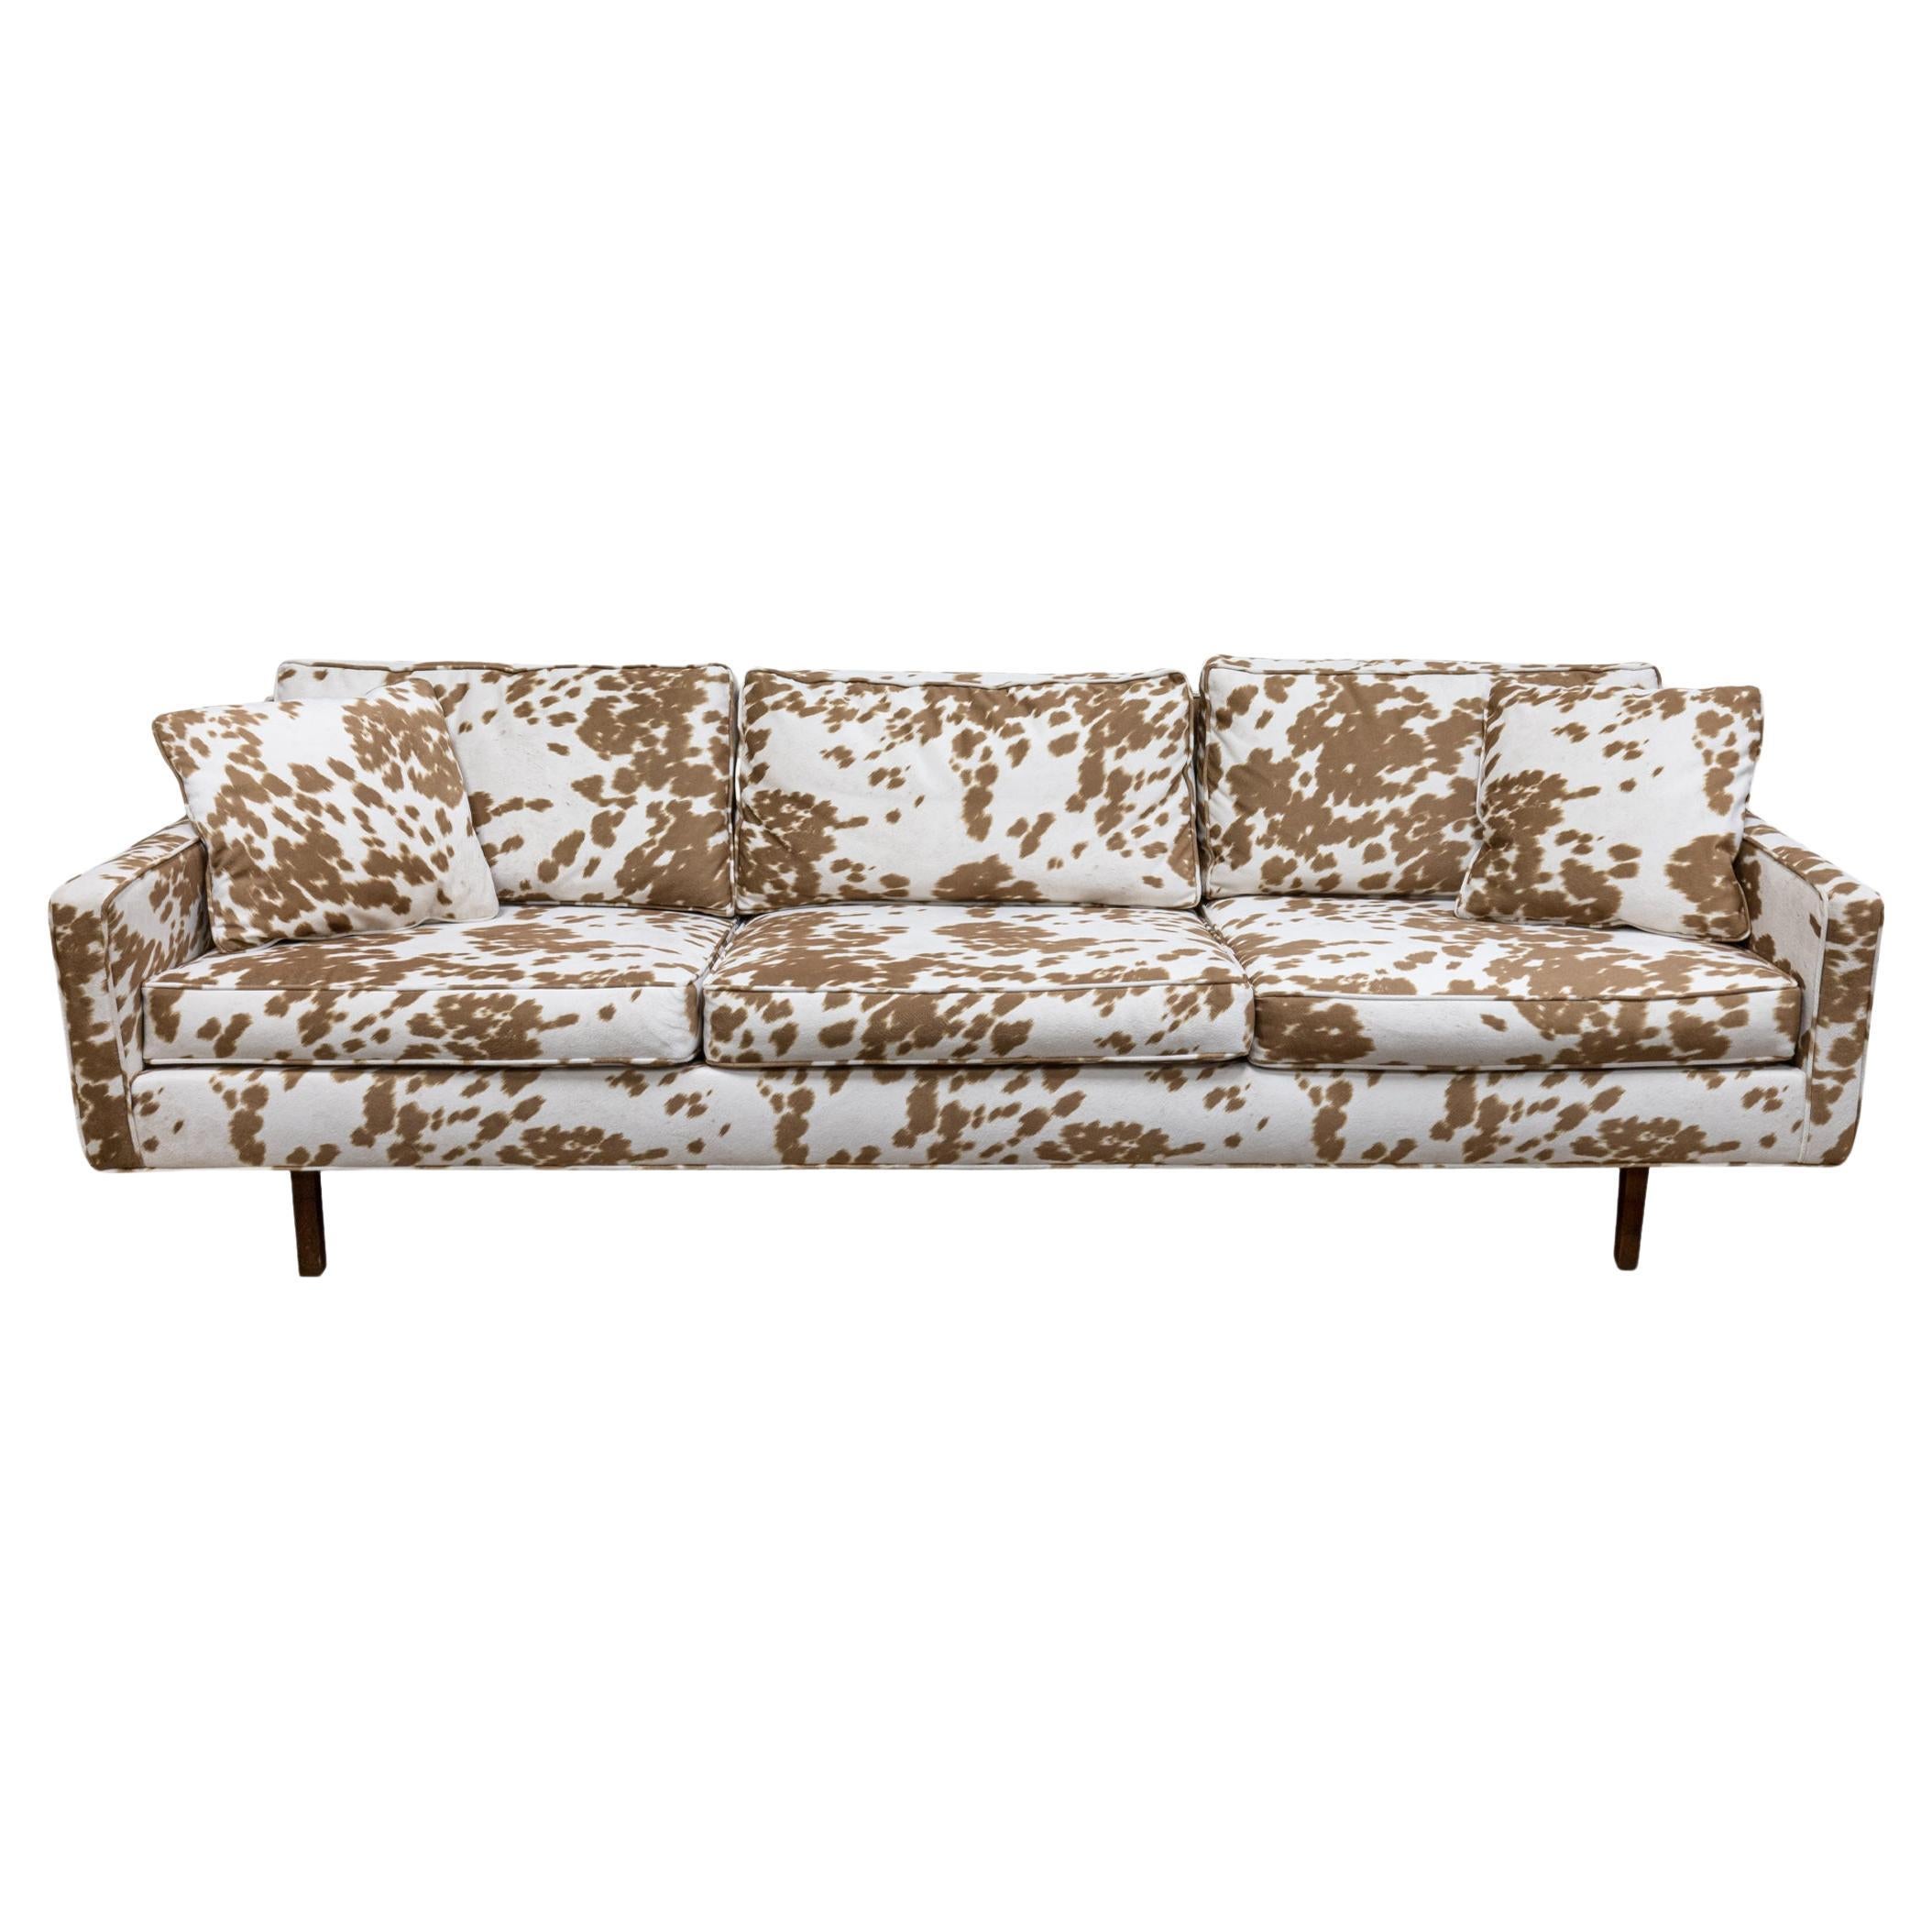 Milo Baughman Style Directional Sofa with Cow Print Fabric and Wooden Legs For Sale